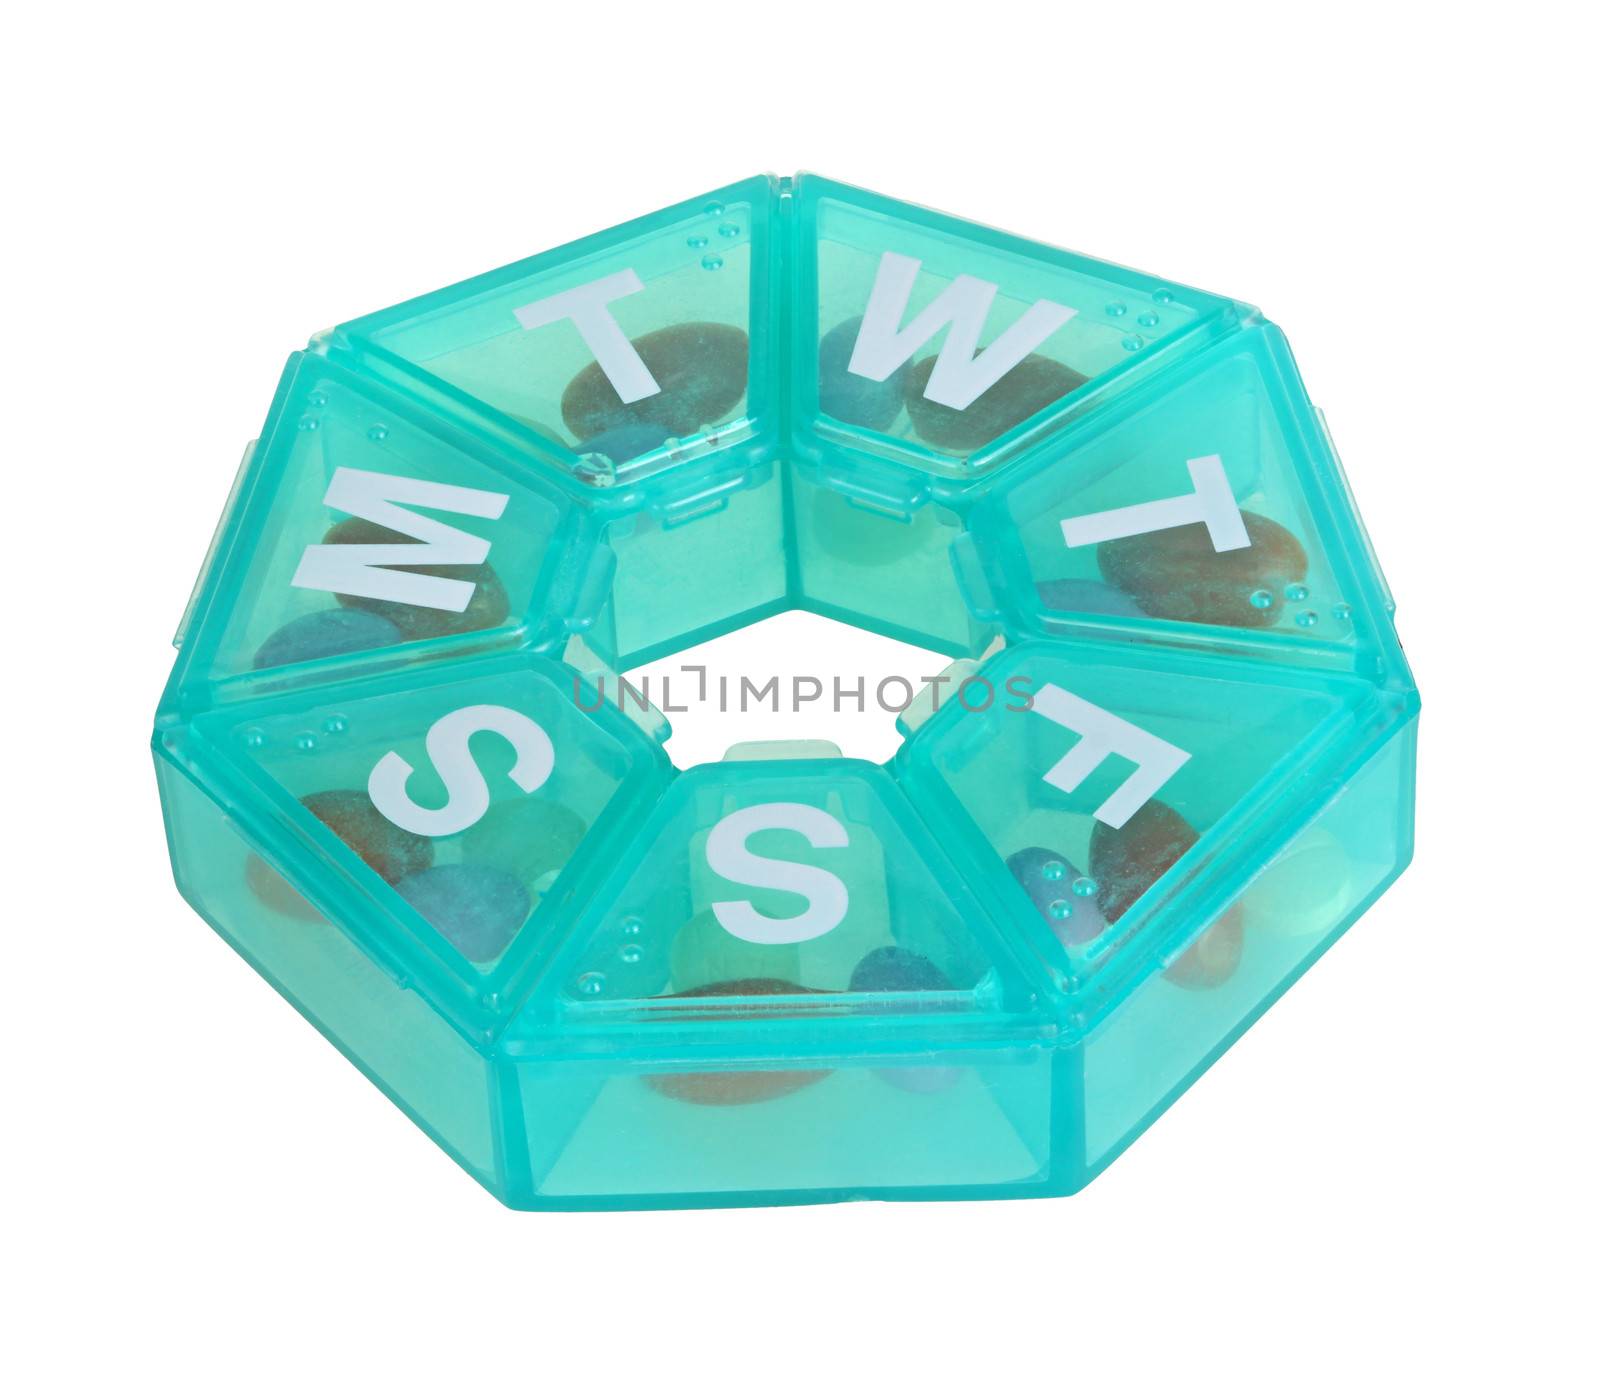 Heptagonal dispenser for a week of pills isolated against a white background